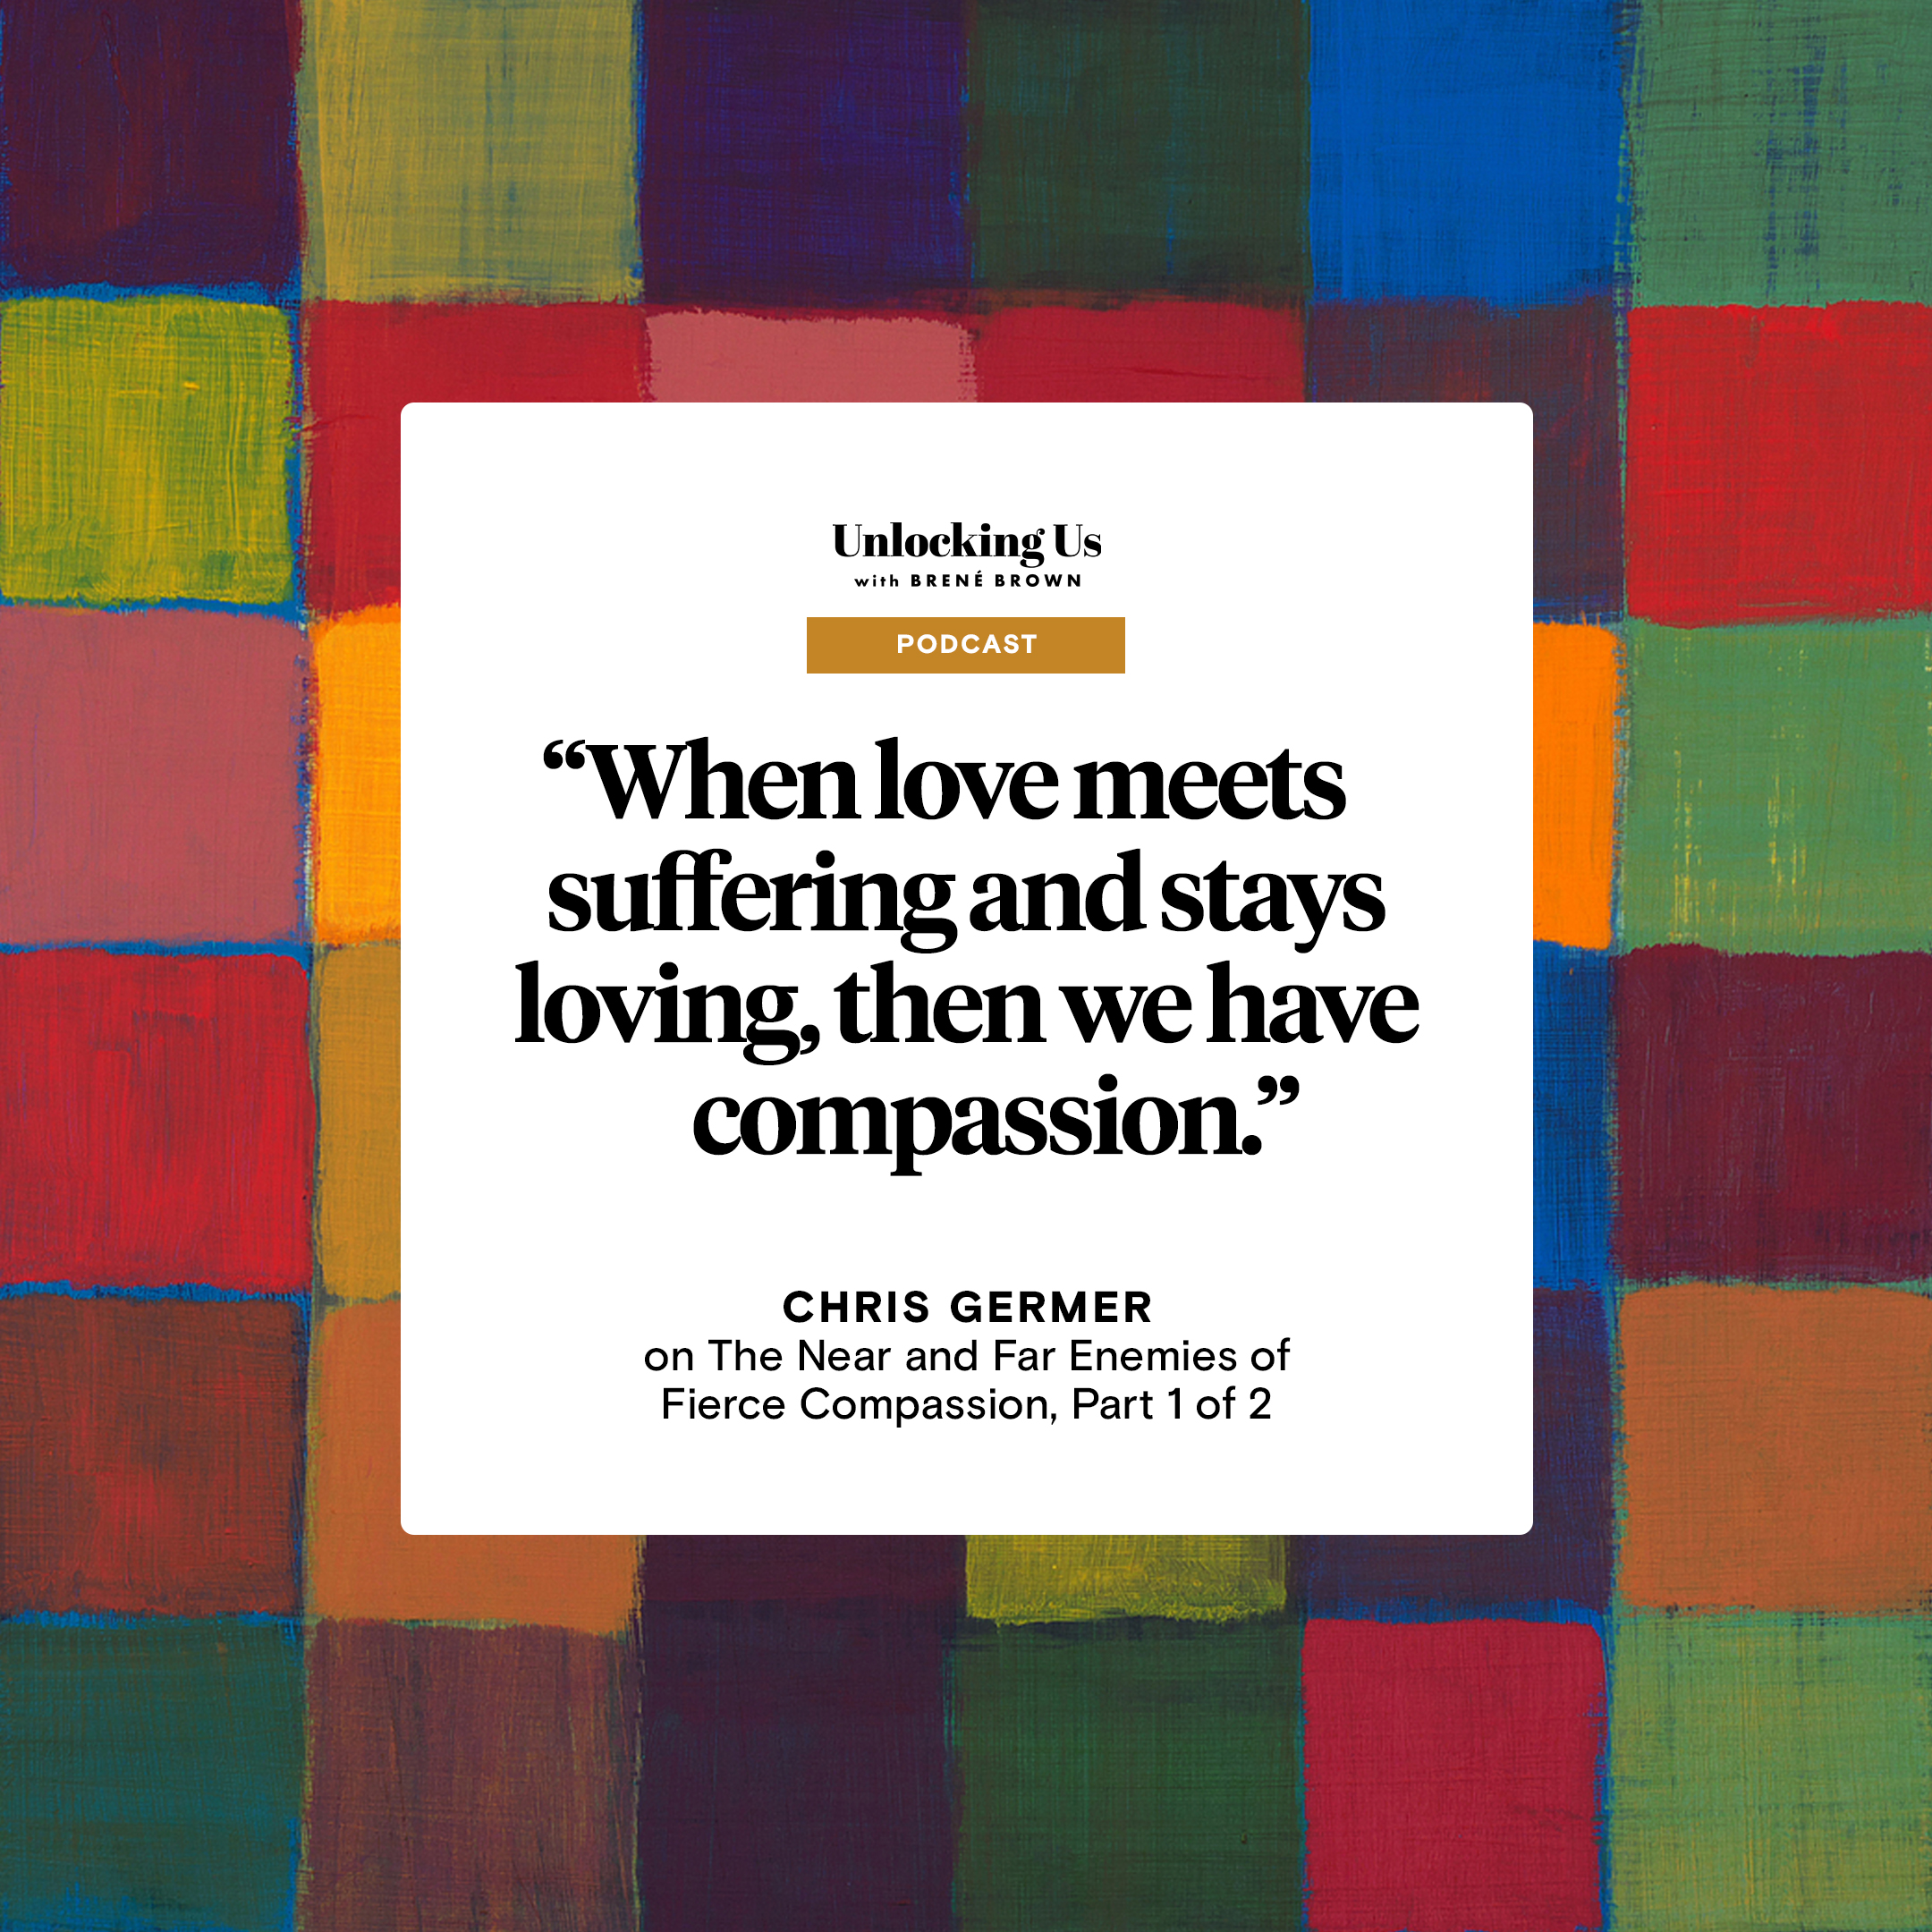 A quote from Chris Germer, a guest on the Unlocking Us podcast with Brené Brown: When love meets suffering and stays loving, then you have compassion.